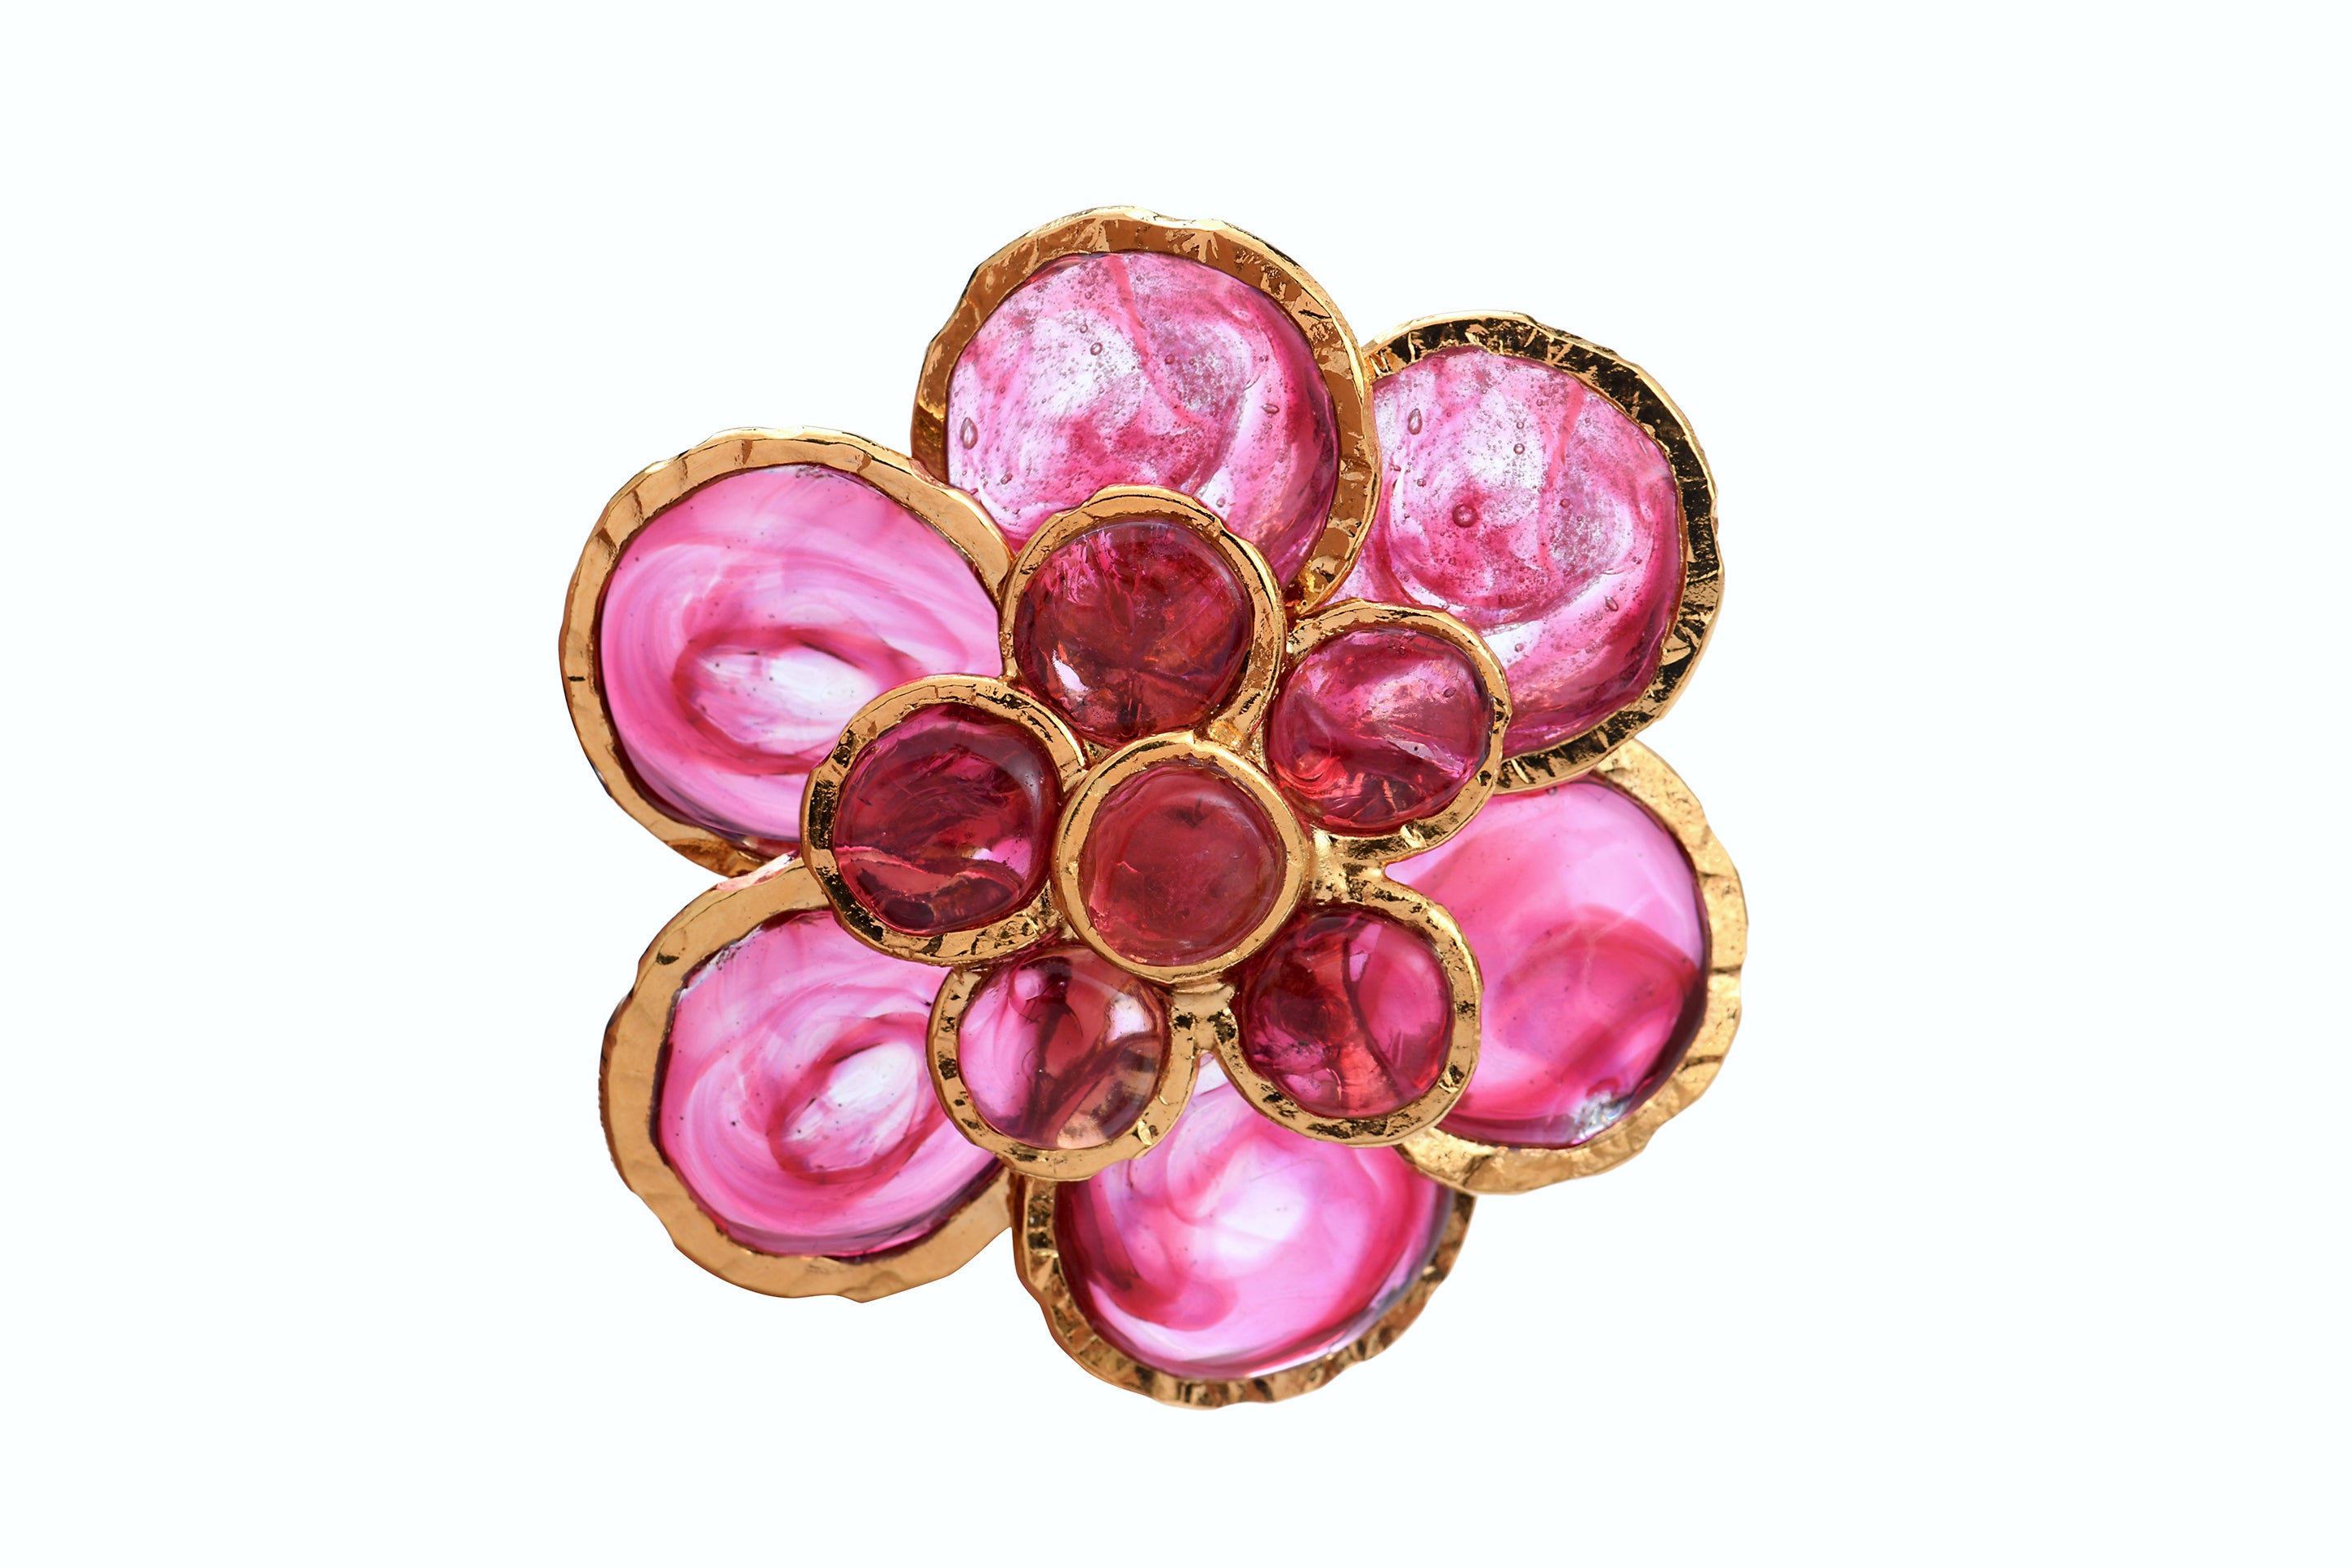 The New Classic Flat Flower Brooch